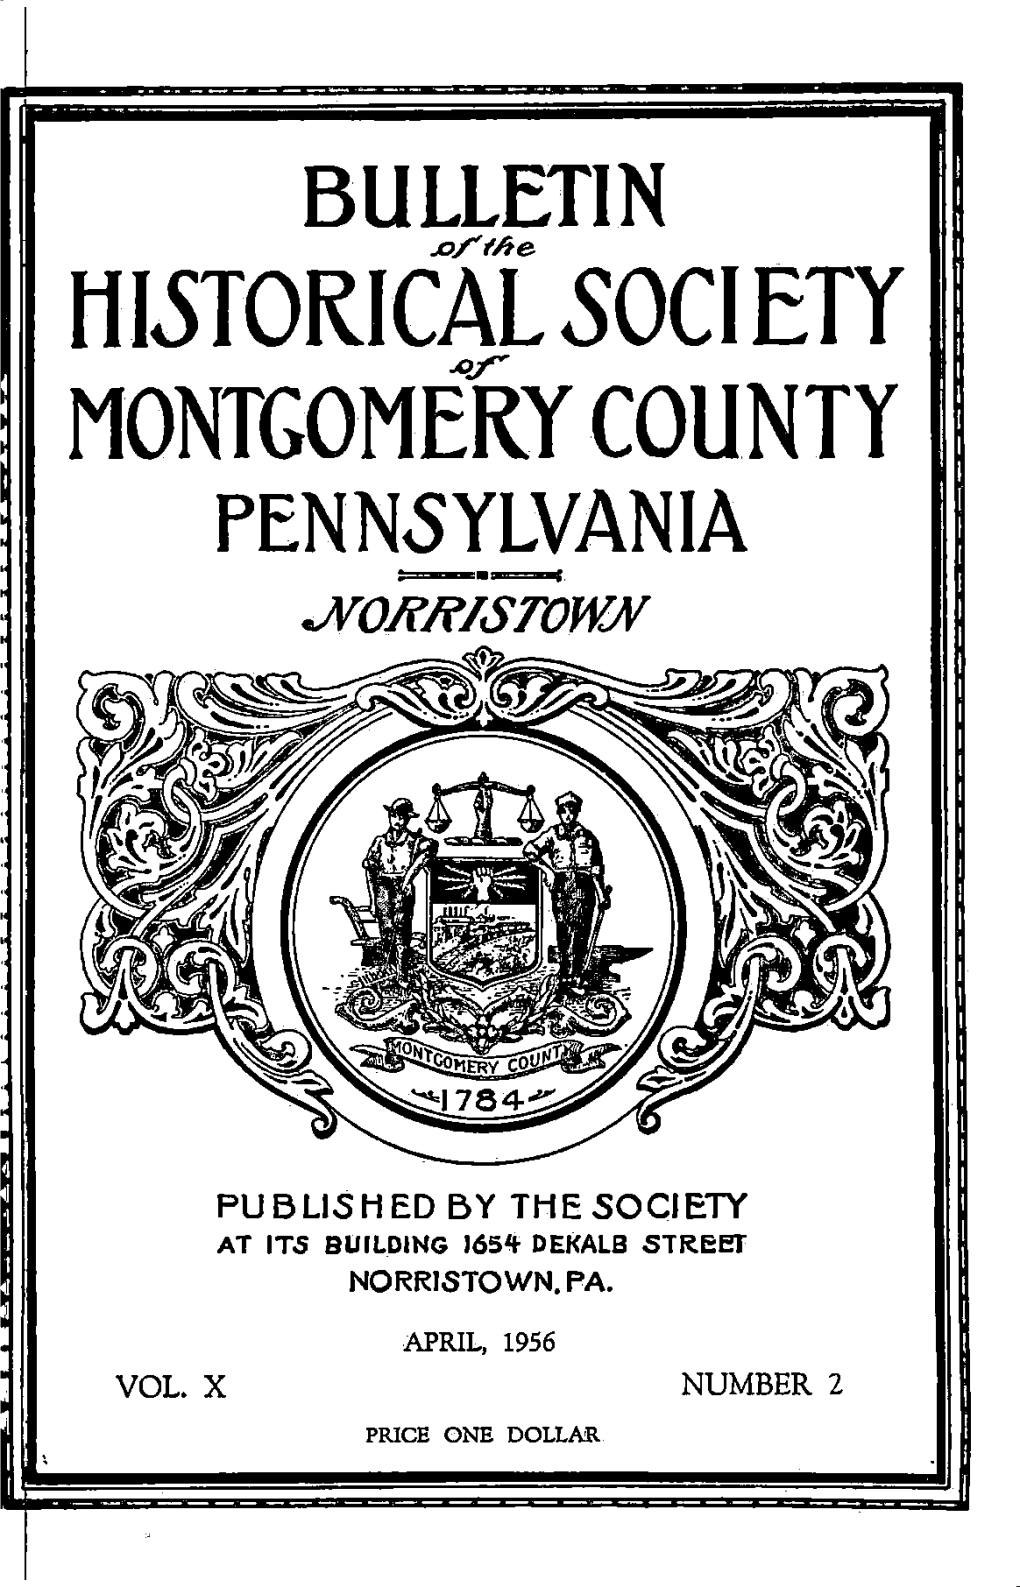 Historical 50Ciety Montgomery County Pennsylvania J^Orr/Stown